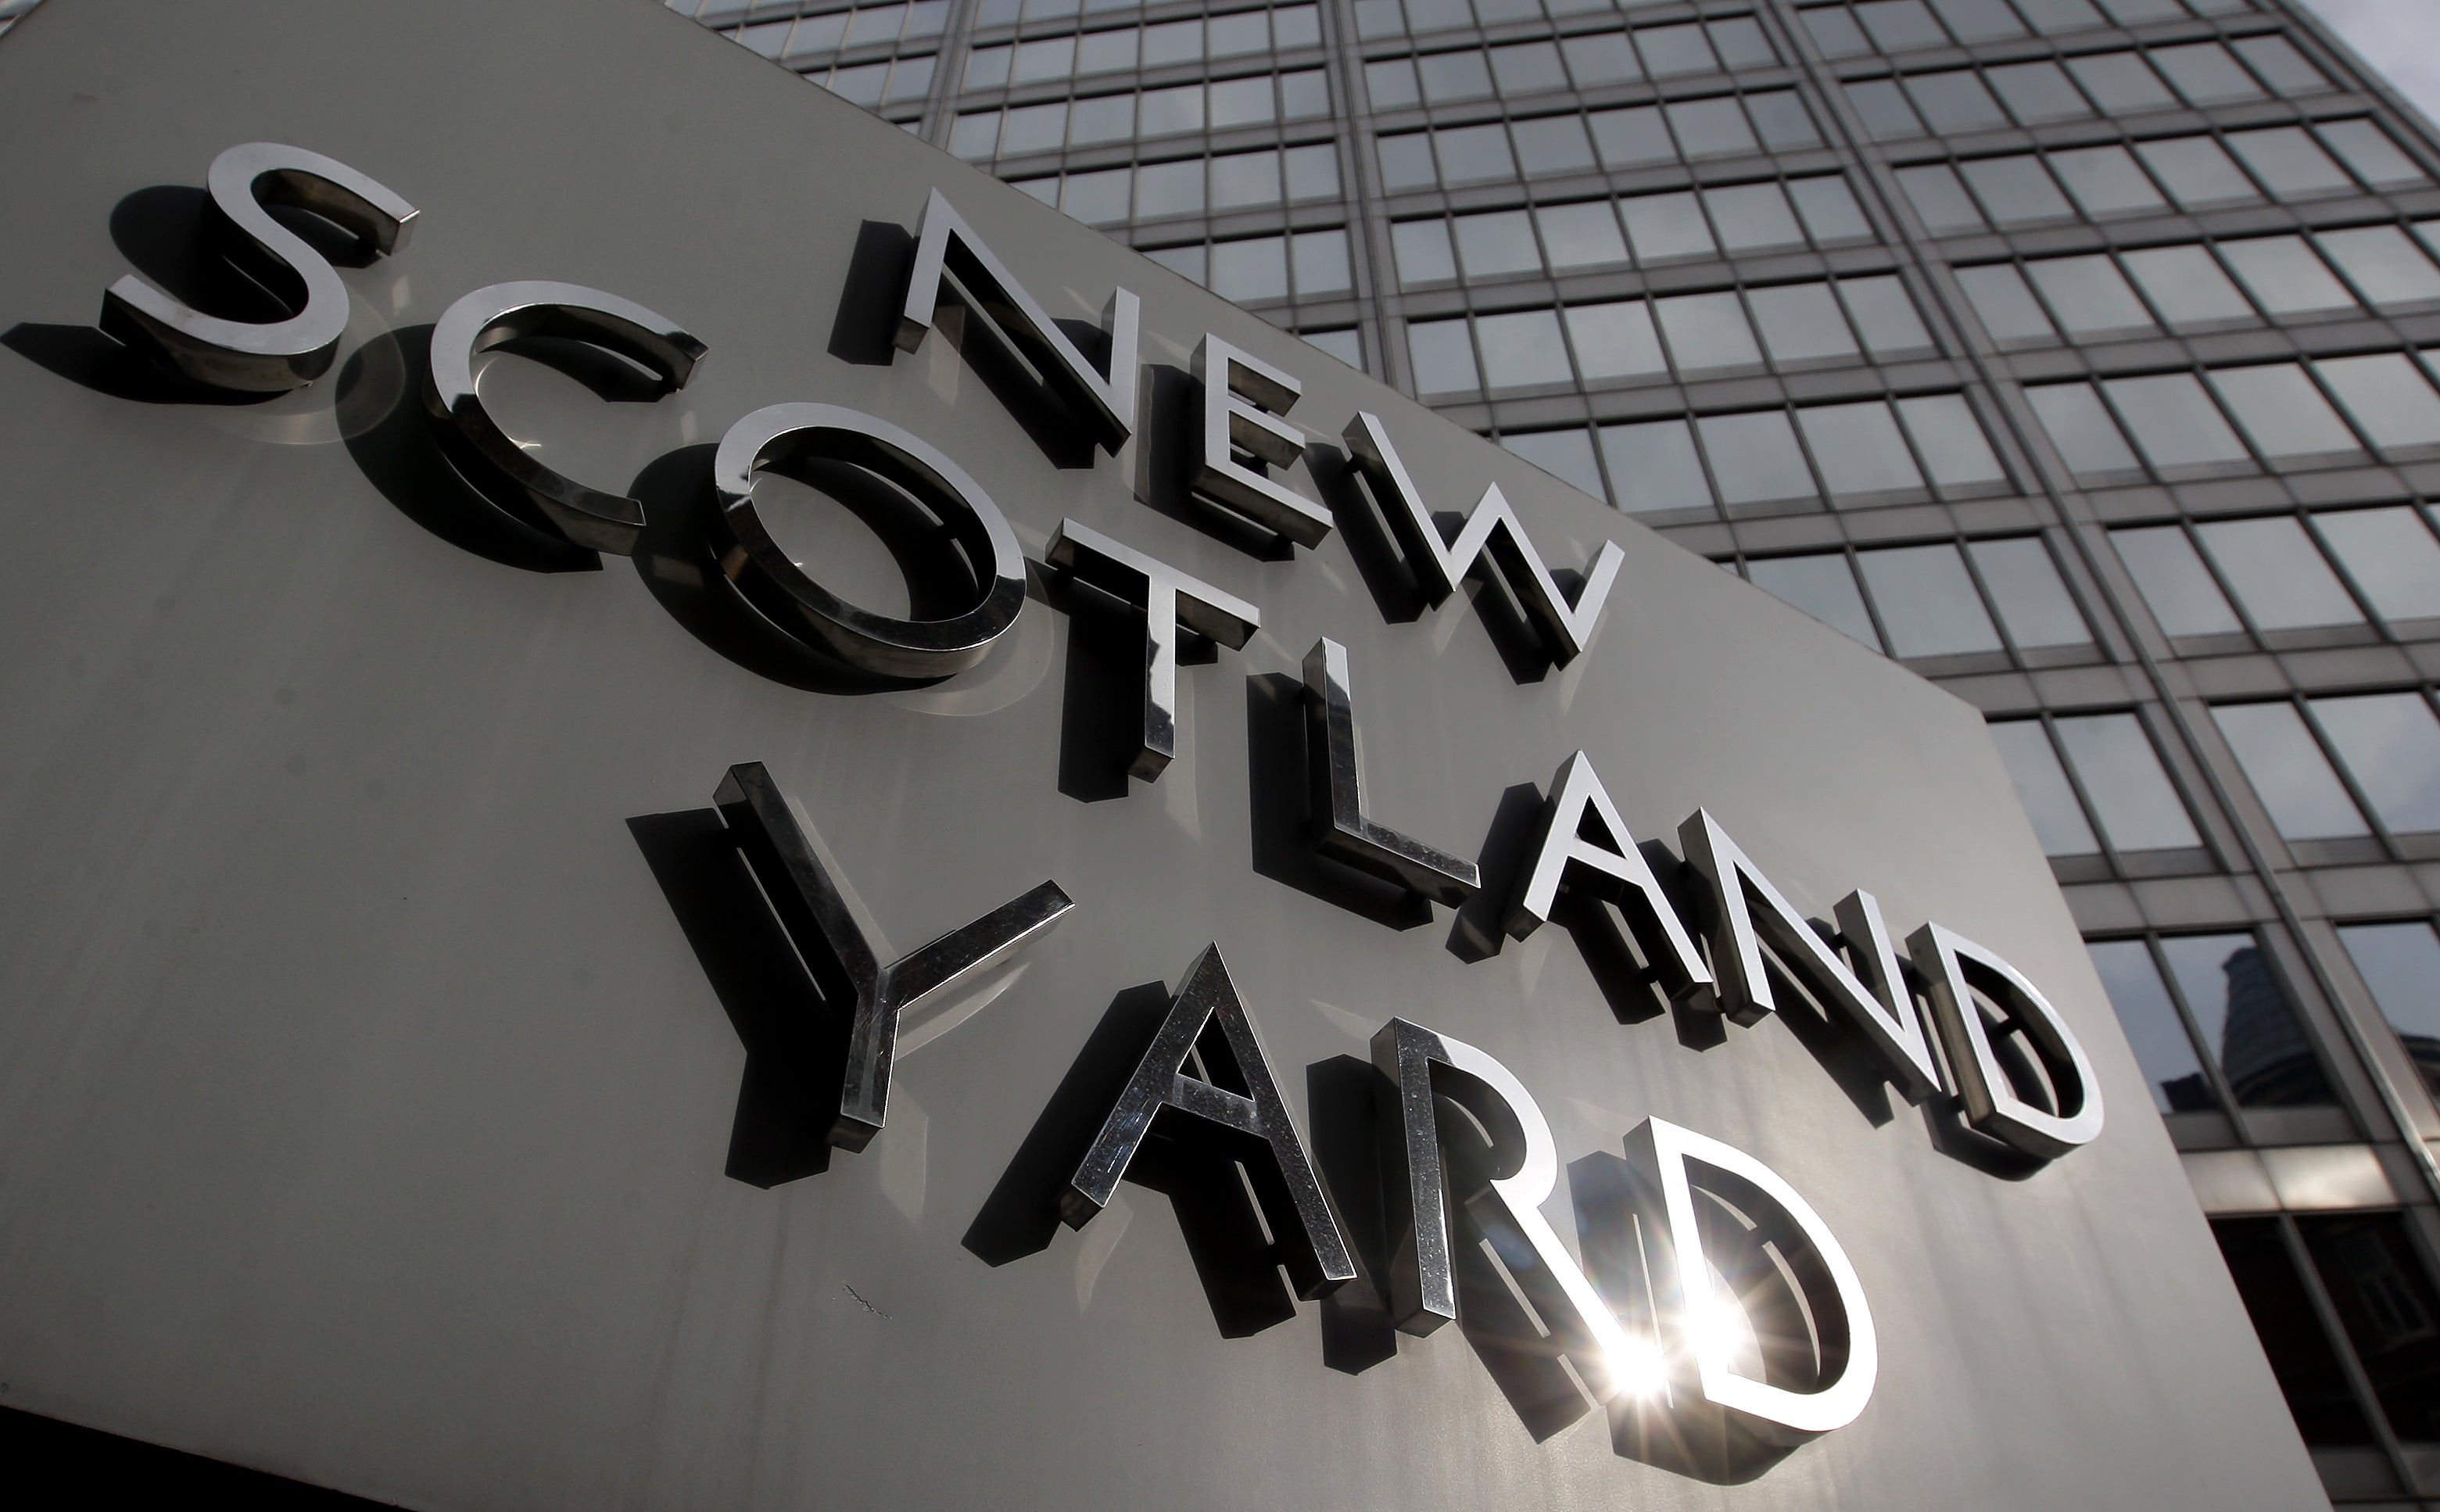 PC Christopher Bates was given a final written warning following a misconduct hearing